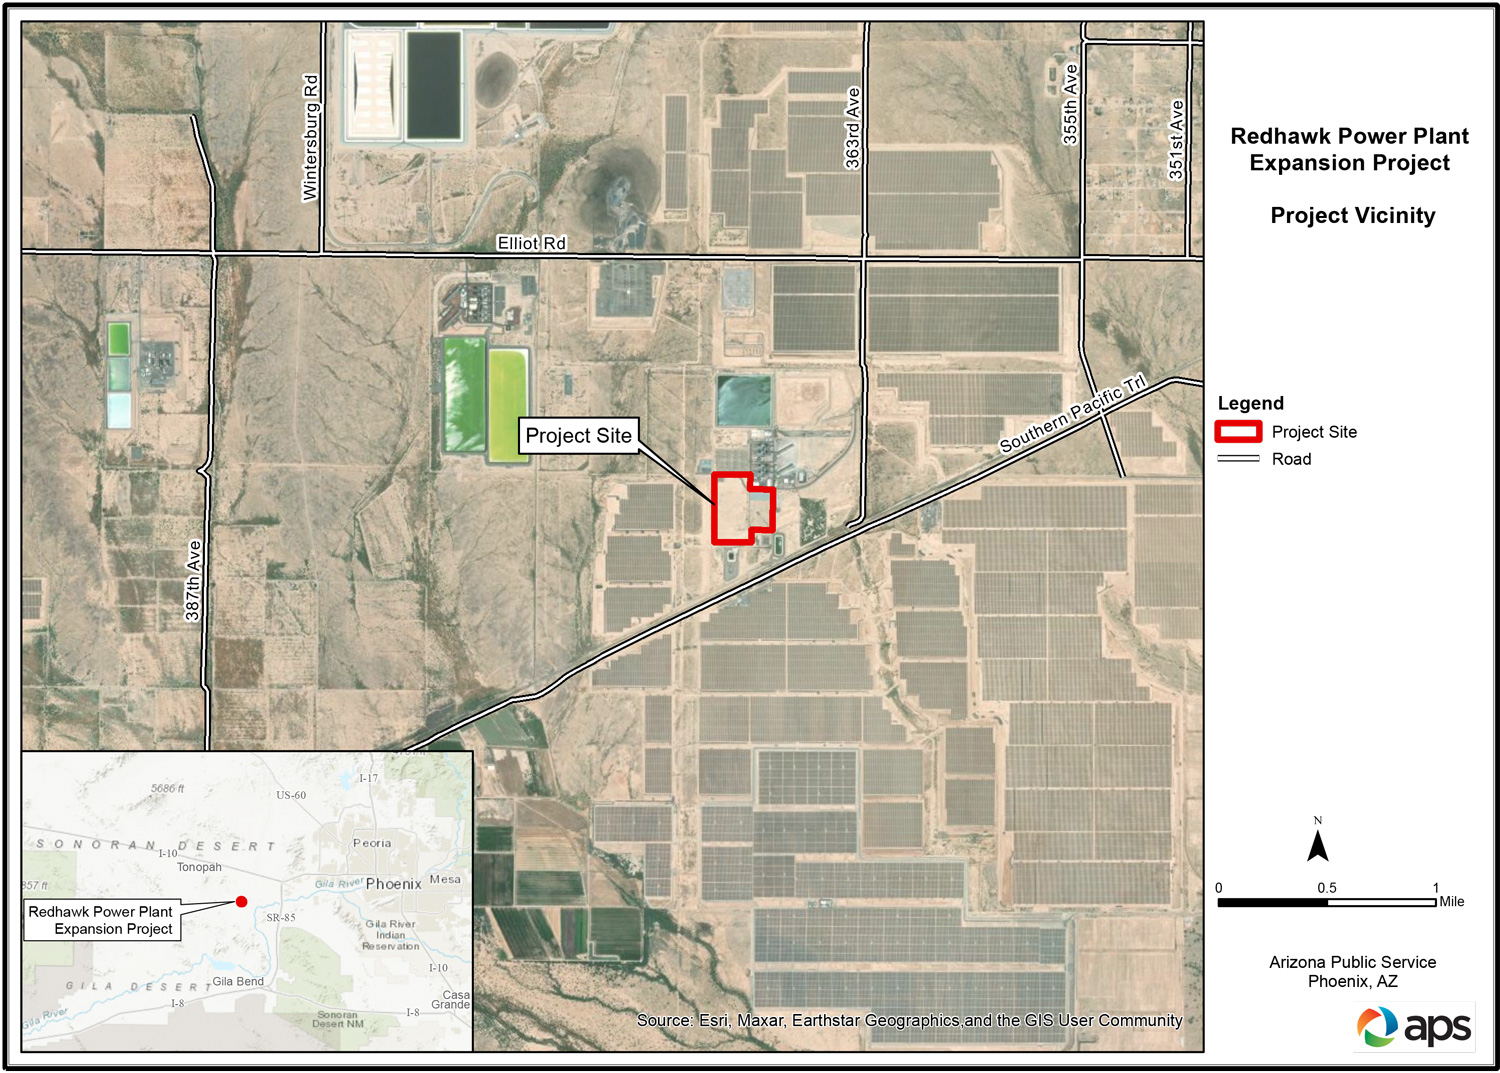 Redhawk Expansion Project vicinity map, showing the project site at the intersection of 363rd Avenue and Southern Pacific Trail south west of Phoenix. 